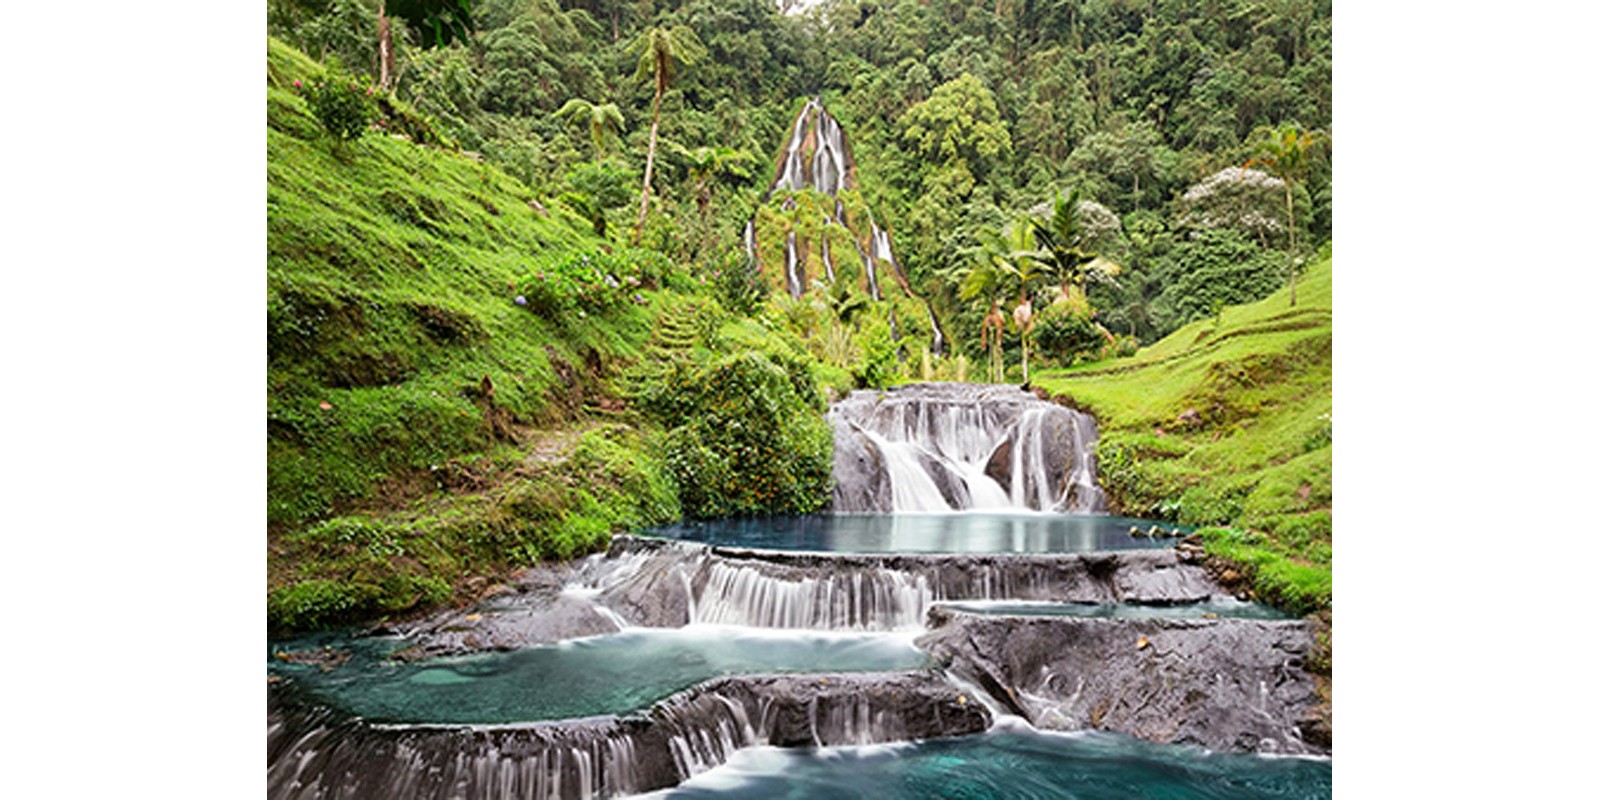 Pangea Images - Waterfall in Santa Rosa de Cabal, Colombia